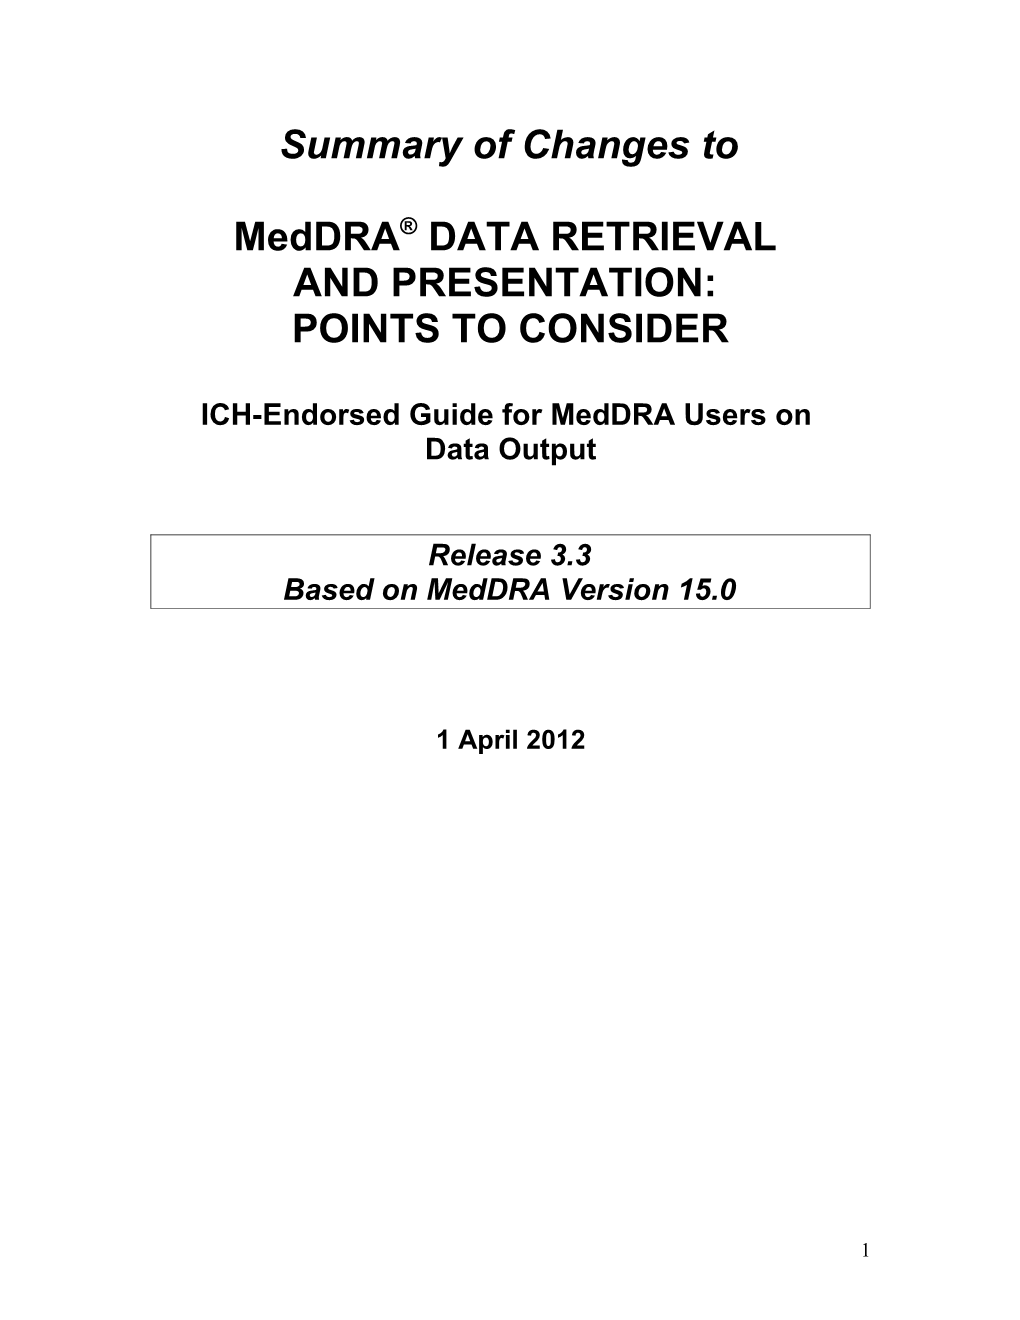 Summary of Changes to Data Retrieval and Presentation: Points to Consider